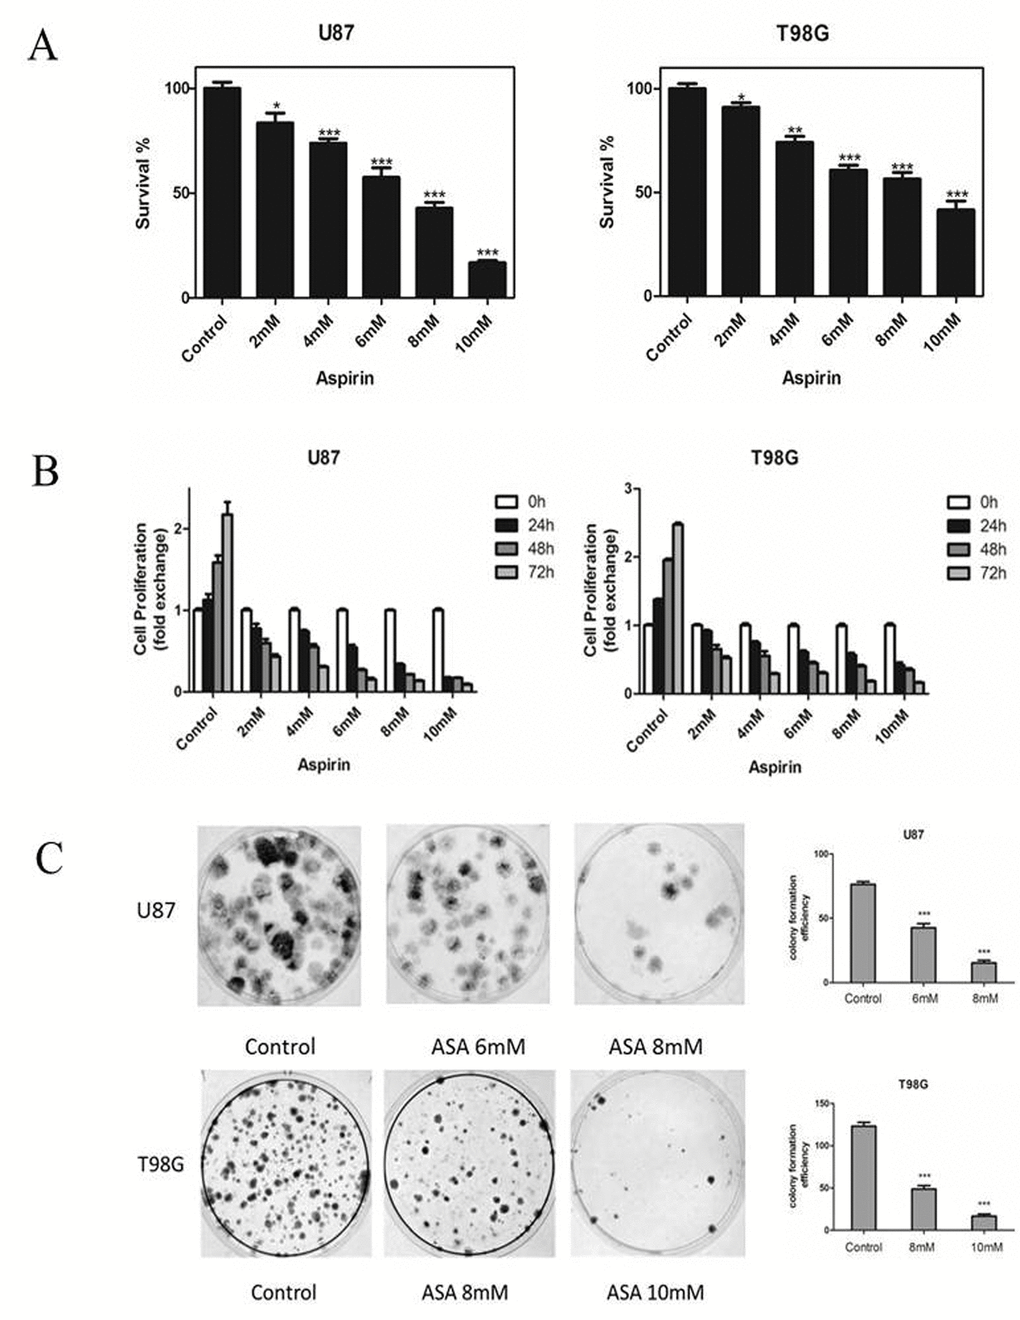 Effects of aspirin on glioma cells survival and proliferation. (A) U87 and T98G cells were treated with increasing concentrations of aspirin for 24 h. Cell survival was analyzed by CCK-8 assay. (B) U87 and T98G cells were treated with indicated concentrations of aspirin and harvested after 24, 48 and 72 h. Cell proliferation was analyzed by CCK-8 assay. (C) The glioma cells viability upon indicated concentrations of aspirin treatment were determined by colony formation assay. Data are shown as mean±SEM for the three replicates. Statistical significance levels are indicated as: *P 